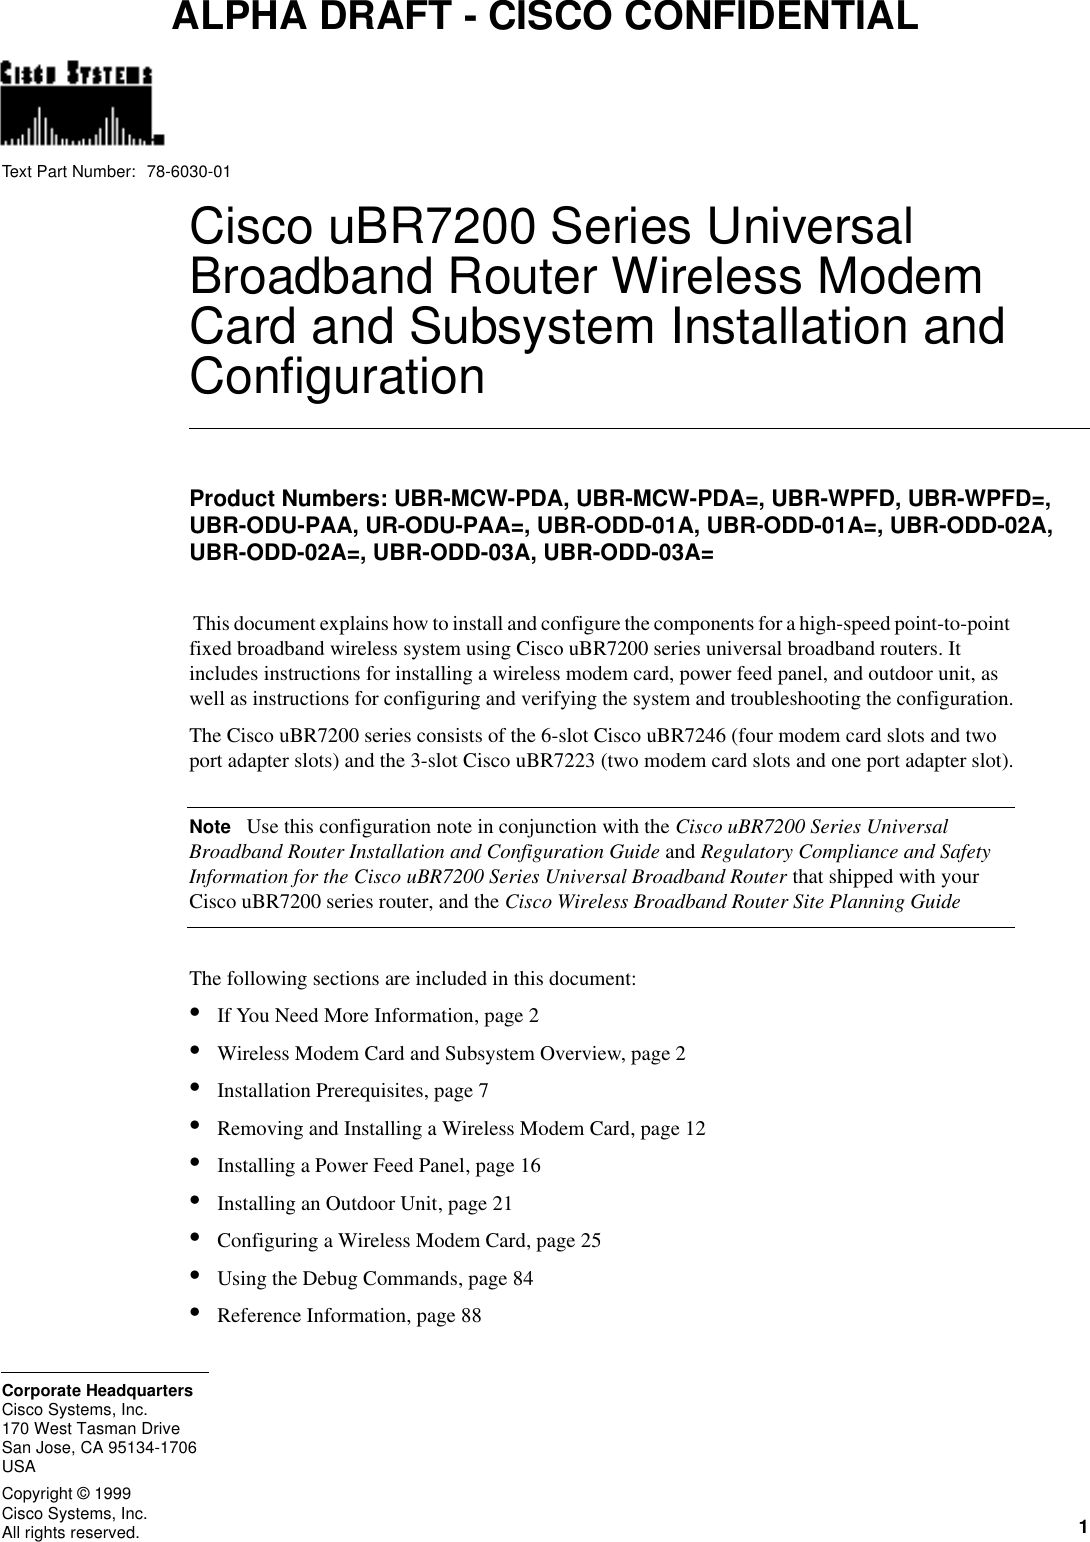  1Cisco Systems, Inc.All rights reserved.170 West Tasman DriveSan Jose, CA 95134-1706USACisco Systems, Inc.Corporate HeadquartersCopyright © 1999Text Part Number:ALPHA DRAFT - CISCO CONFIDENTIALCiscouBR7200 Series Universal Broadband Router Wireless Modem Card and Subsystem Installation and ConfigurationProduct Numbers: UBR-MCW-PDA, UBR-MCW-PDA=, UBR-WPFD, UBR-WPFD=, UBR-ODU-PAA, UR-ODU-PAA=, UBR-ODD-01A, UBR-ODD-01A=, UBR-ODD-02A, UBR-ODD-02A=, UBR-ODD-03A, UBR-ODD-03A= This document explains how to install and configure the components for a high-speed point-to-point fixed broadband wireless system using CiscouBR7200 series universal broadband routers. It includes instructions for installing a wireless modem card, power feed panel, and outdoor unit, as well as instructions for configuring and verifying the system and troubleshooting the configuration.The CiscouBR7200 series consists of the 6-slot CiscouBR7246 (four modem card slots and two port adapter slots) and the 3-slot CiscouBR7223 (two modem card slots and one port adapter slot).NoteUse this configuration note in conjunction with the CiscouBR7200 Series Universal Broadband Router Installation and Configuration Guide and Regulatory Compliance and Safety Information for the CiscouBR7200 Series Universal Broadband Router that shipped with your CiscouBR7200 series router, and the Cisco Wireless Broadband Router Site Planning GuideThe following sections are included in this document:•If You Need More Information, page2•Wireless Modem Card and Subsystem Overview, page2•Installation Prerequisites, page7•Removing and Installing a Wireless Modem Card, page12•Installing a Power Feed Panel, page16•Installing an Outdoor Unit, page21•Configuring a Wireless Modem Card, page25•Using the Debug Commands, page84•Reference Information, page8878-6030-01